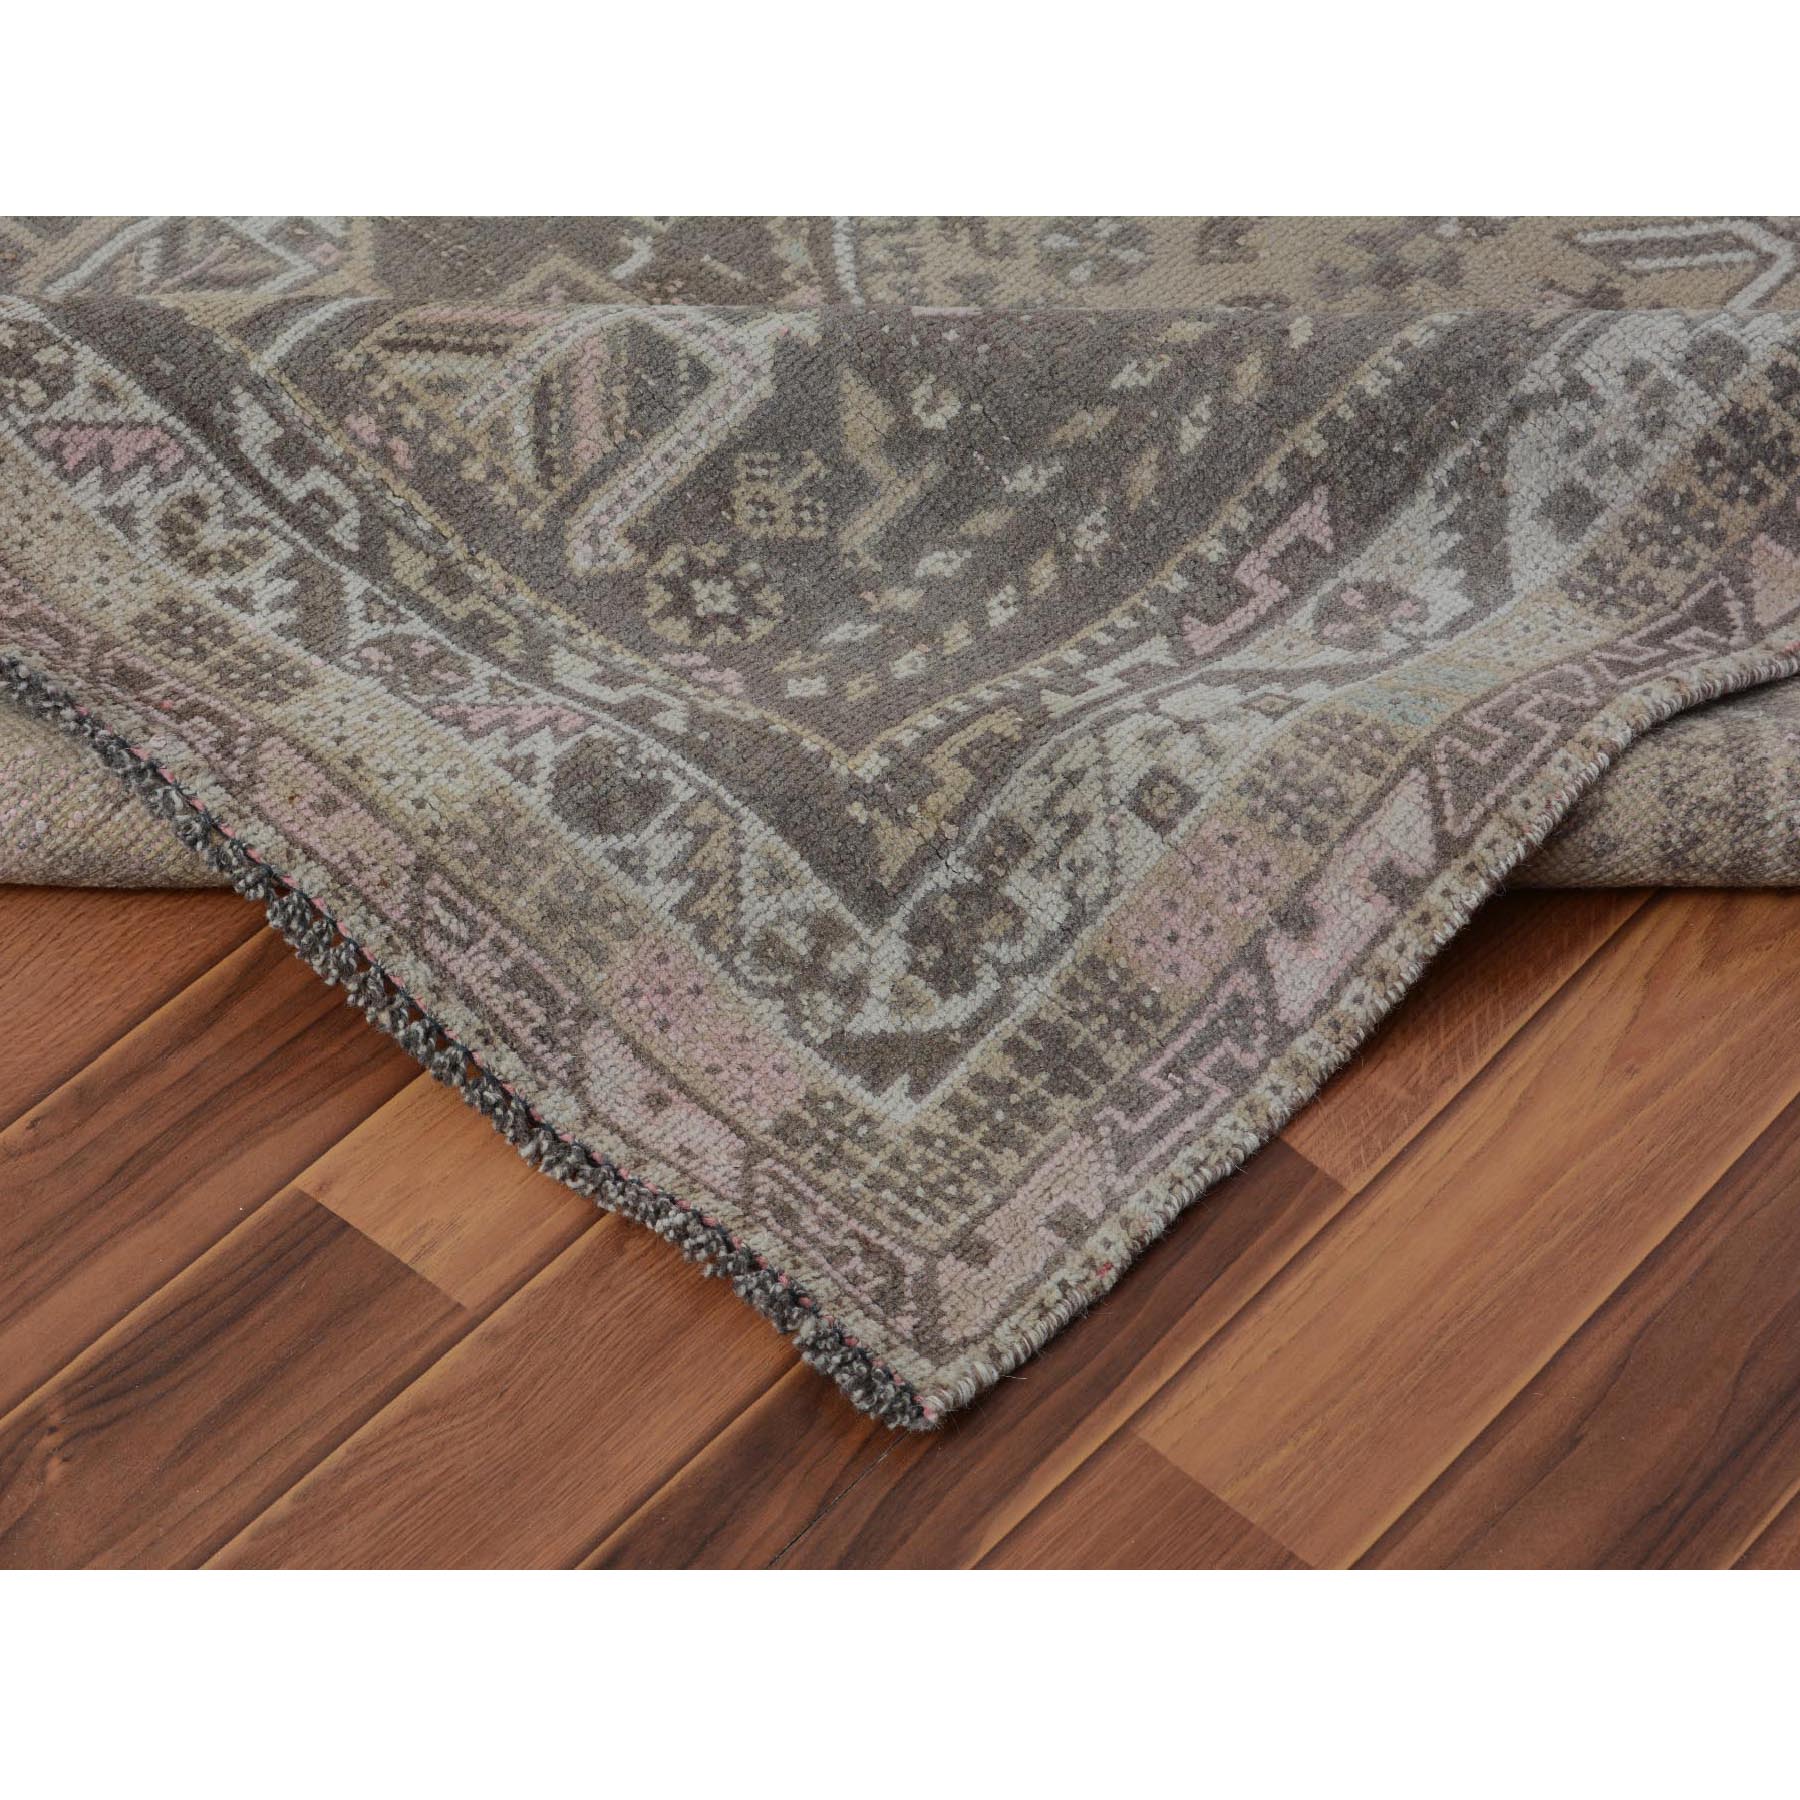 7-1 x9-10  Beige Vintage and Worn Down Persian Qashqai Pure Wool Hand Knotted Oriental Rug 